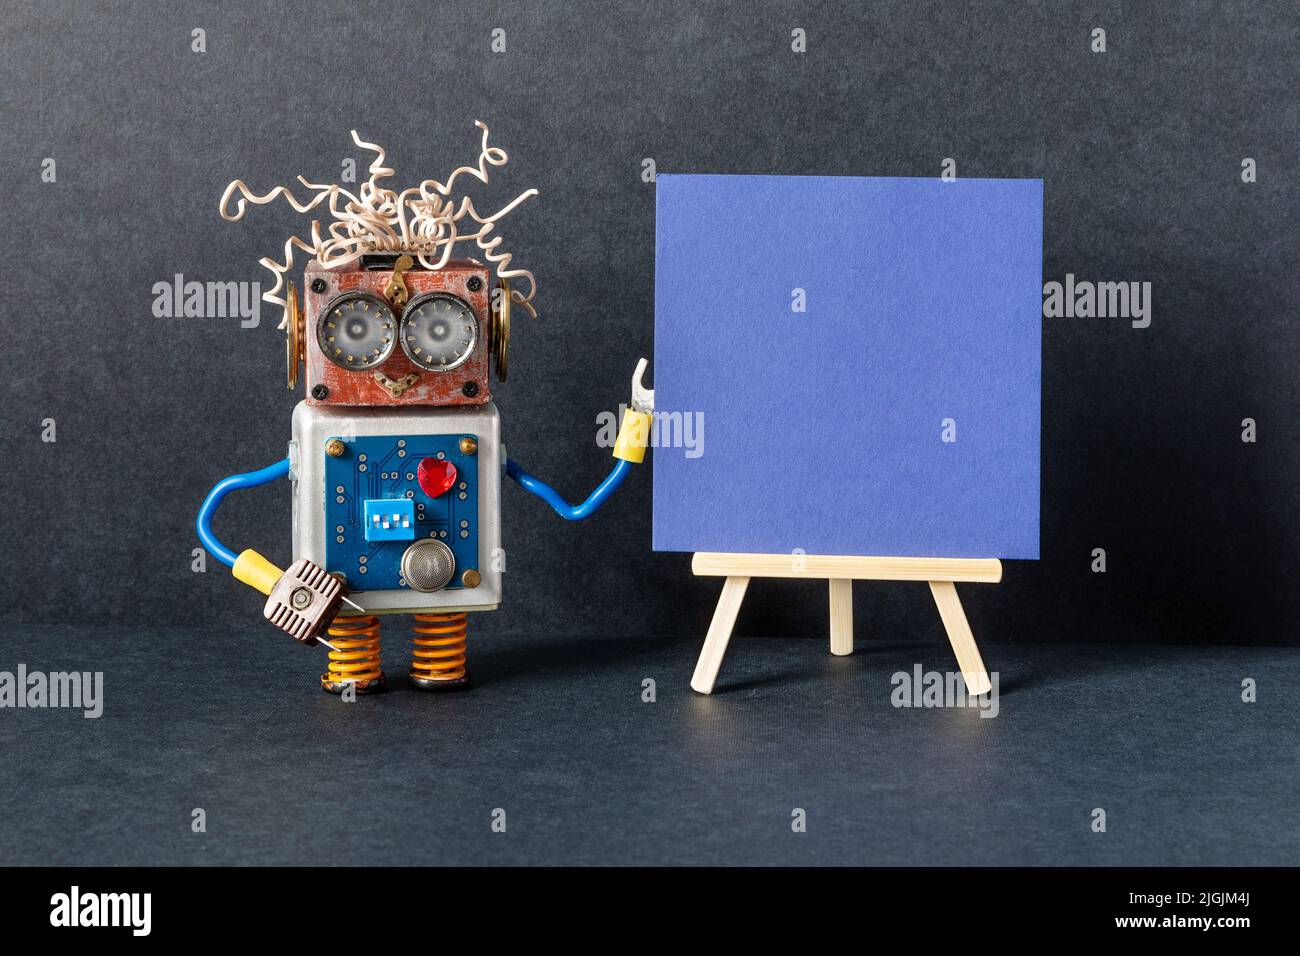 The robot and blue paper placard set on wooden easel. copy space for text. Black background. Gallery frame invitation card concept, empty frame mockup Stock Photo